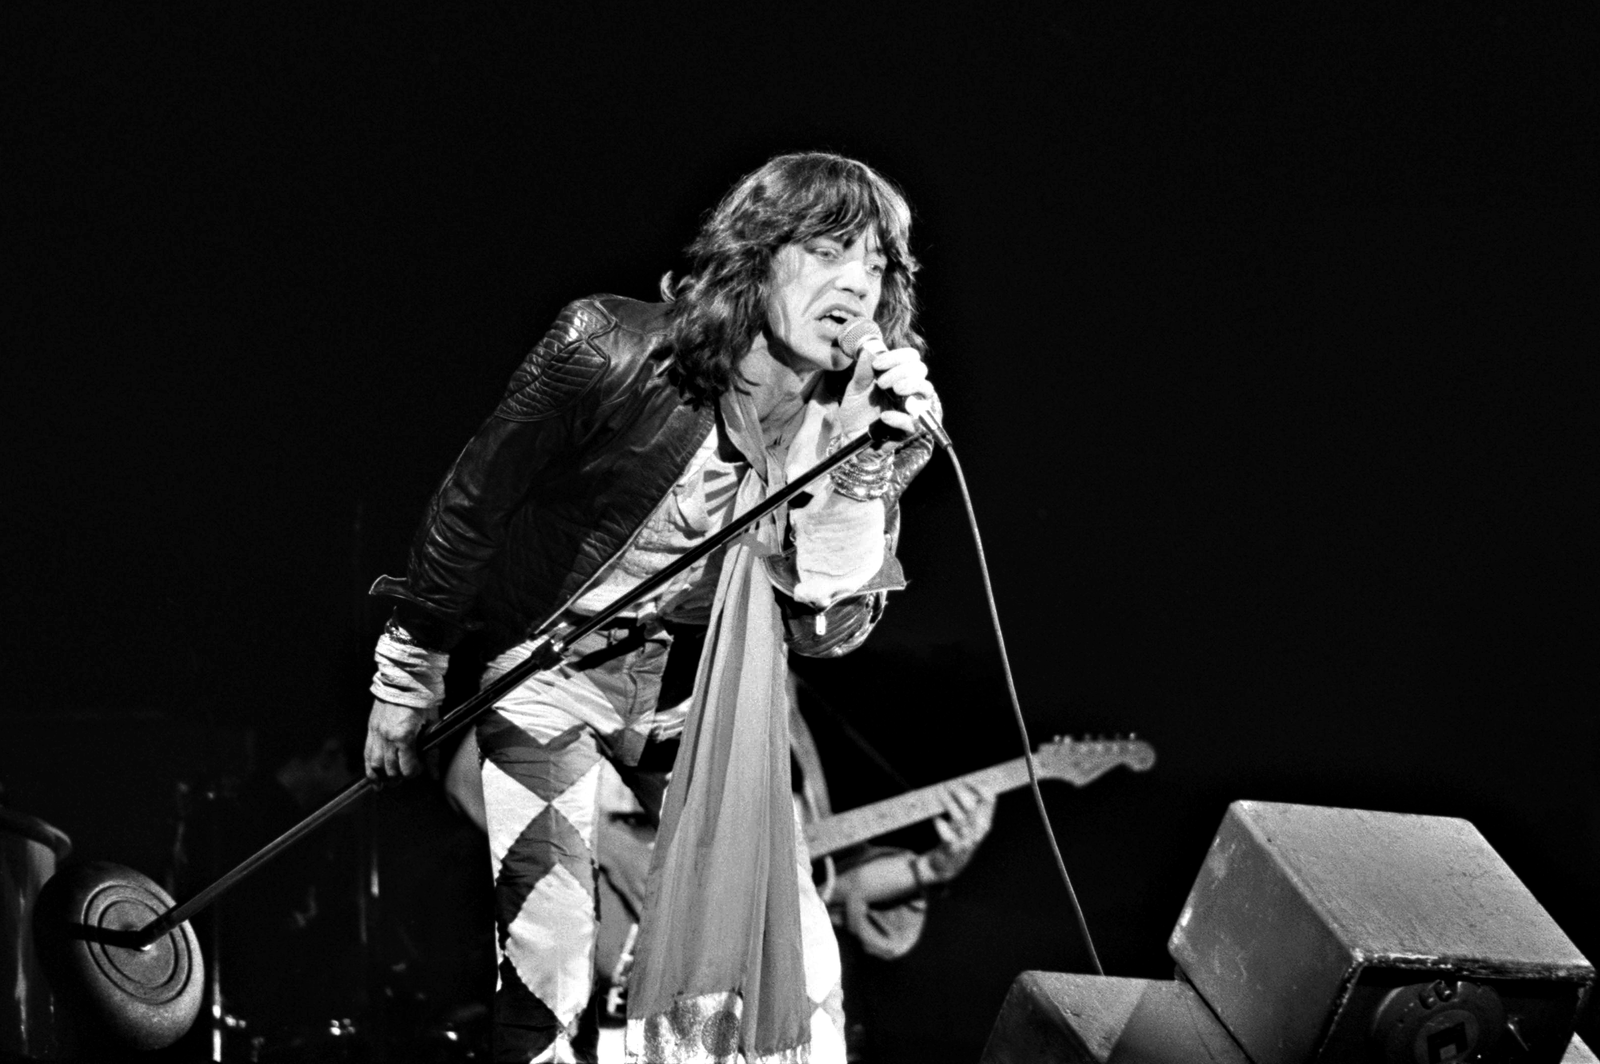 Mick Jagger sings songs more than once!